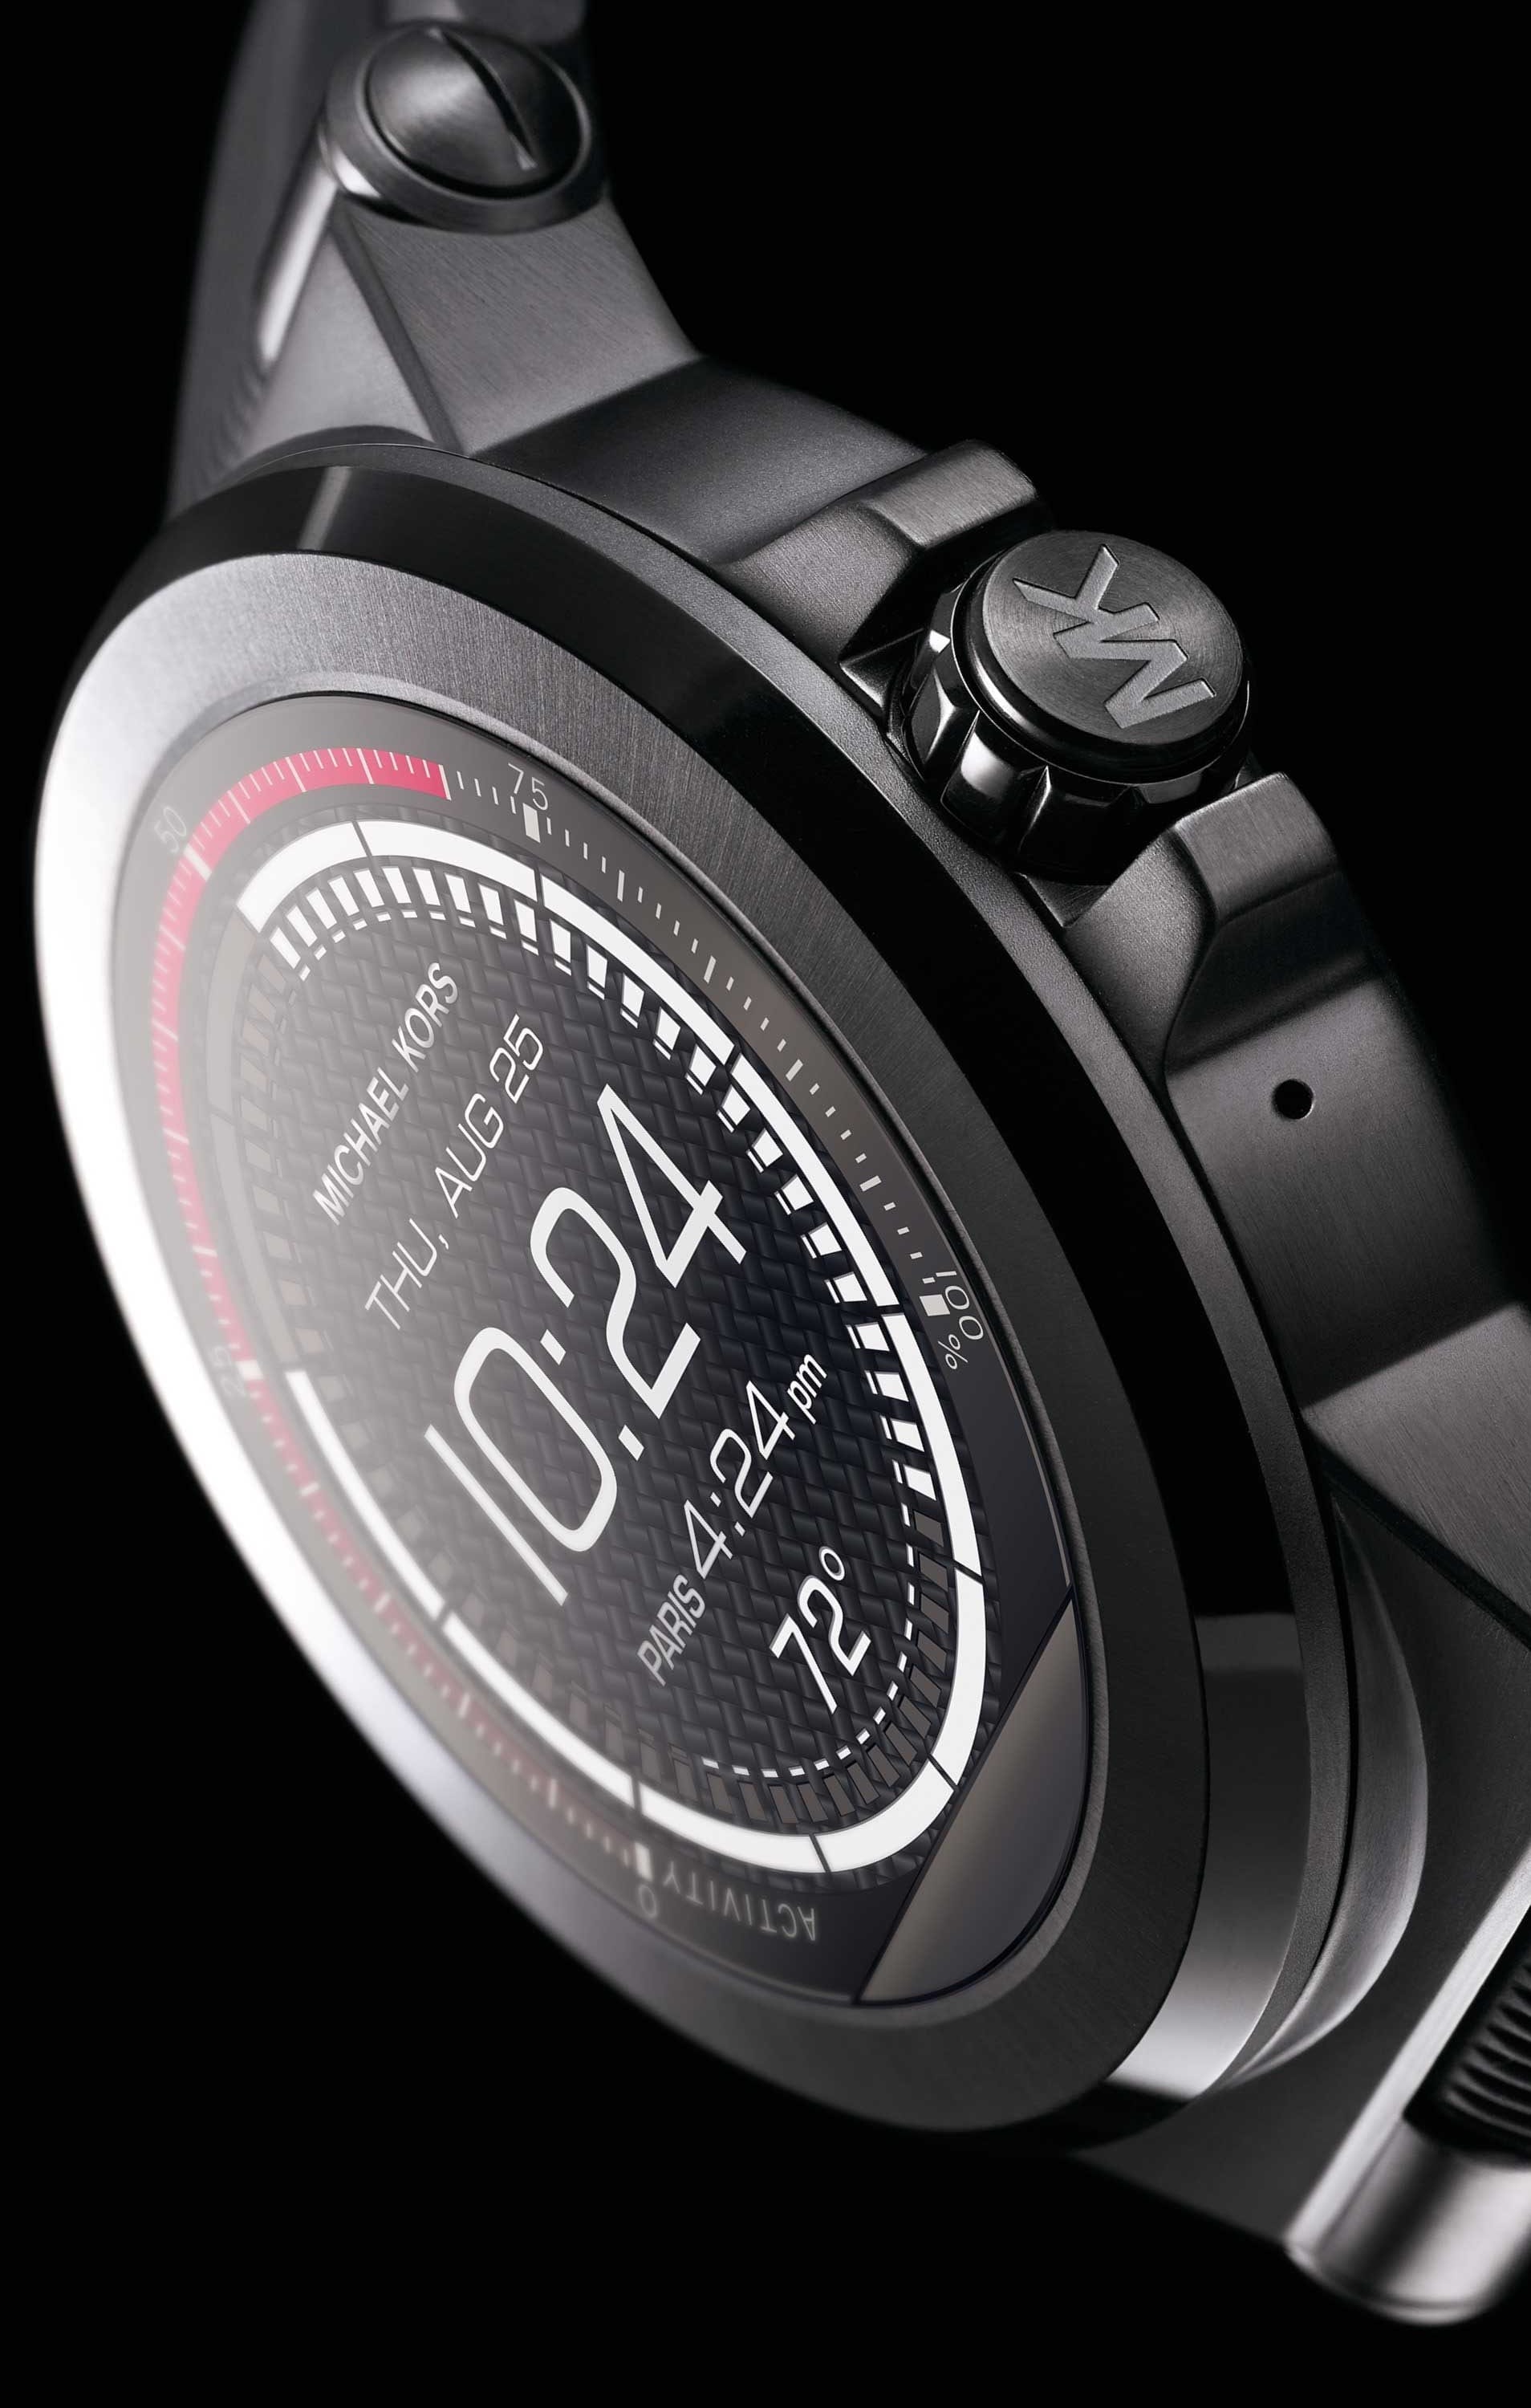 father's day gifts- smart watch